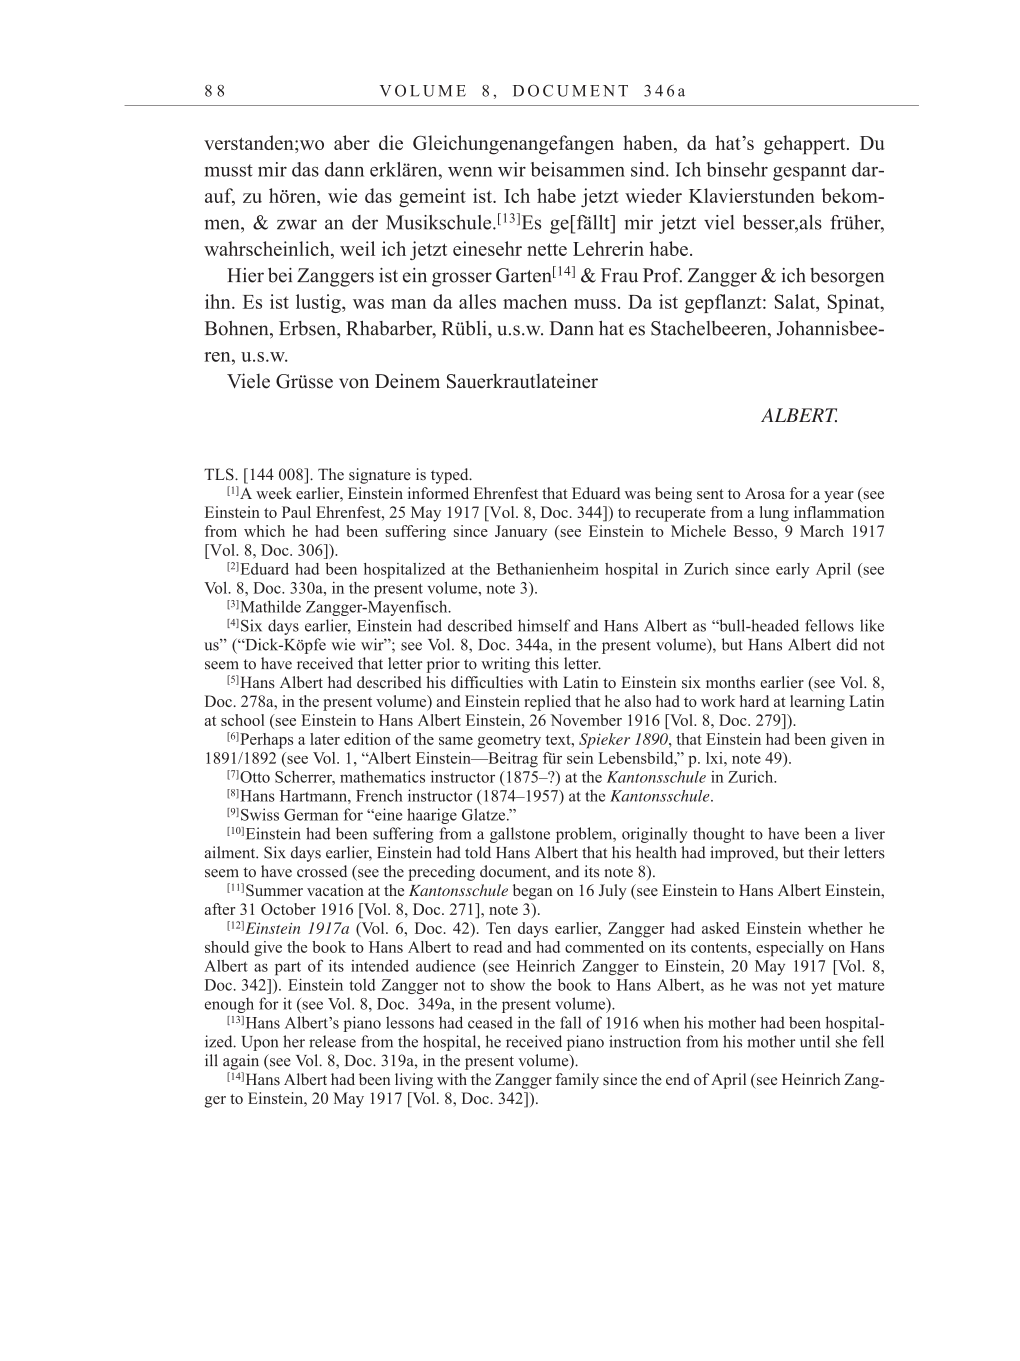 Volume 10: The Berlin Years: Correspondence May-December 1920 / Supplementary Correspondence 1909-1920 page 88